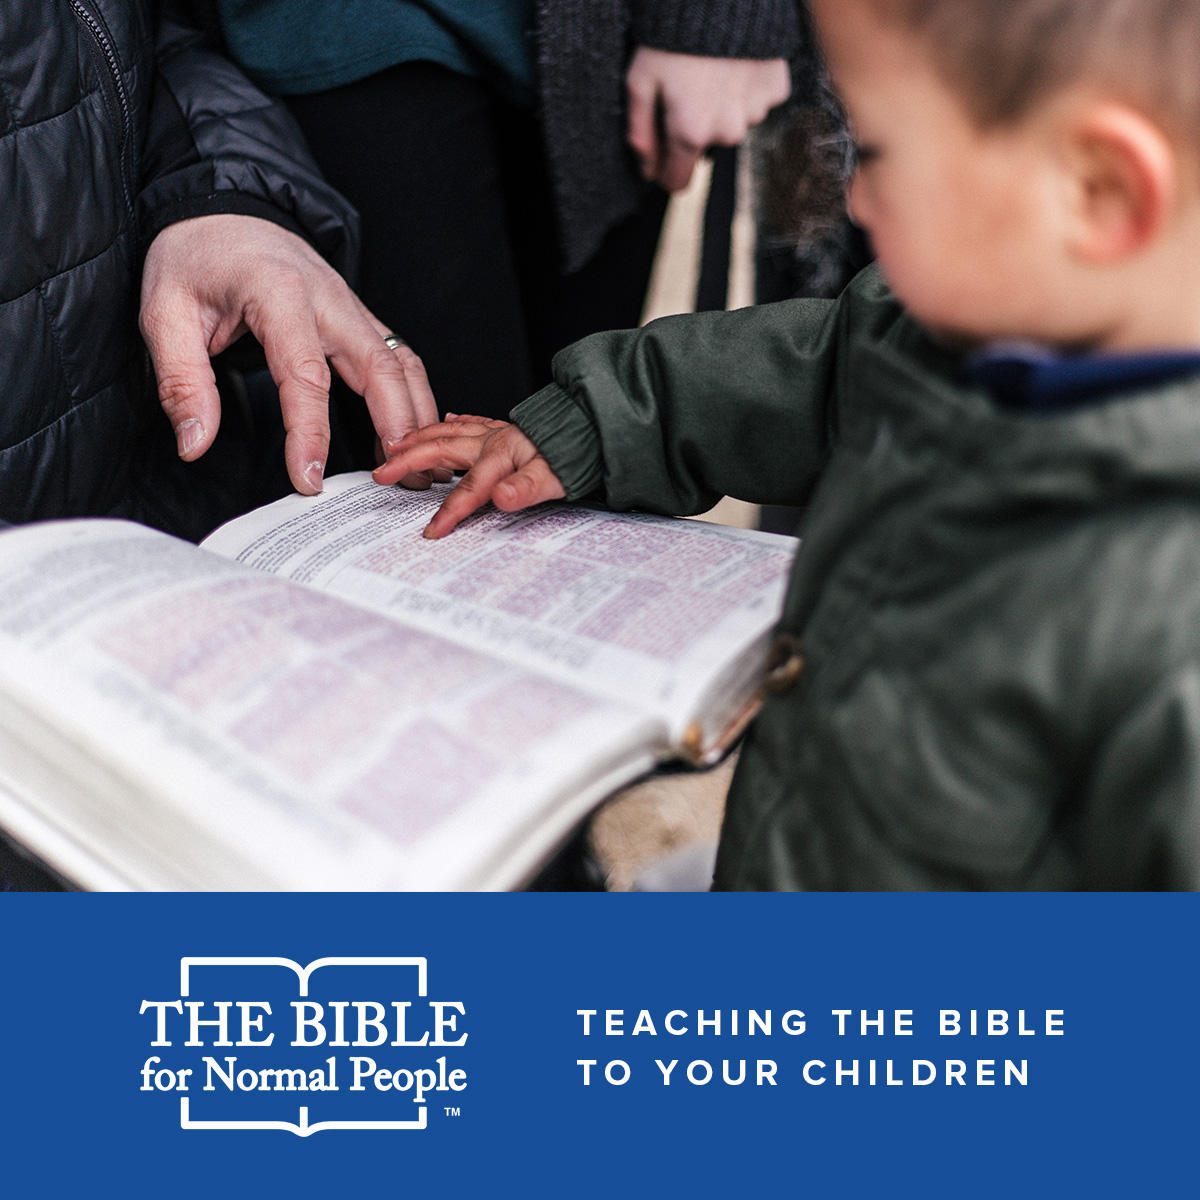 Episode 7: Pete Enns and Jared Byas – Teaching the Bible to Your Children